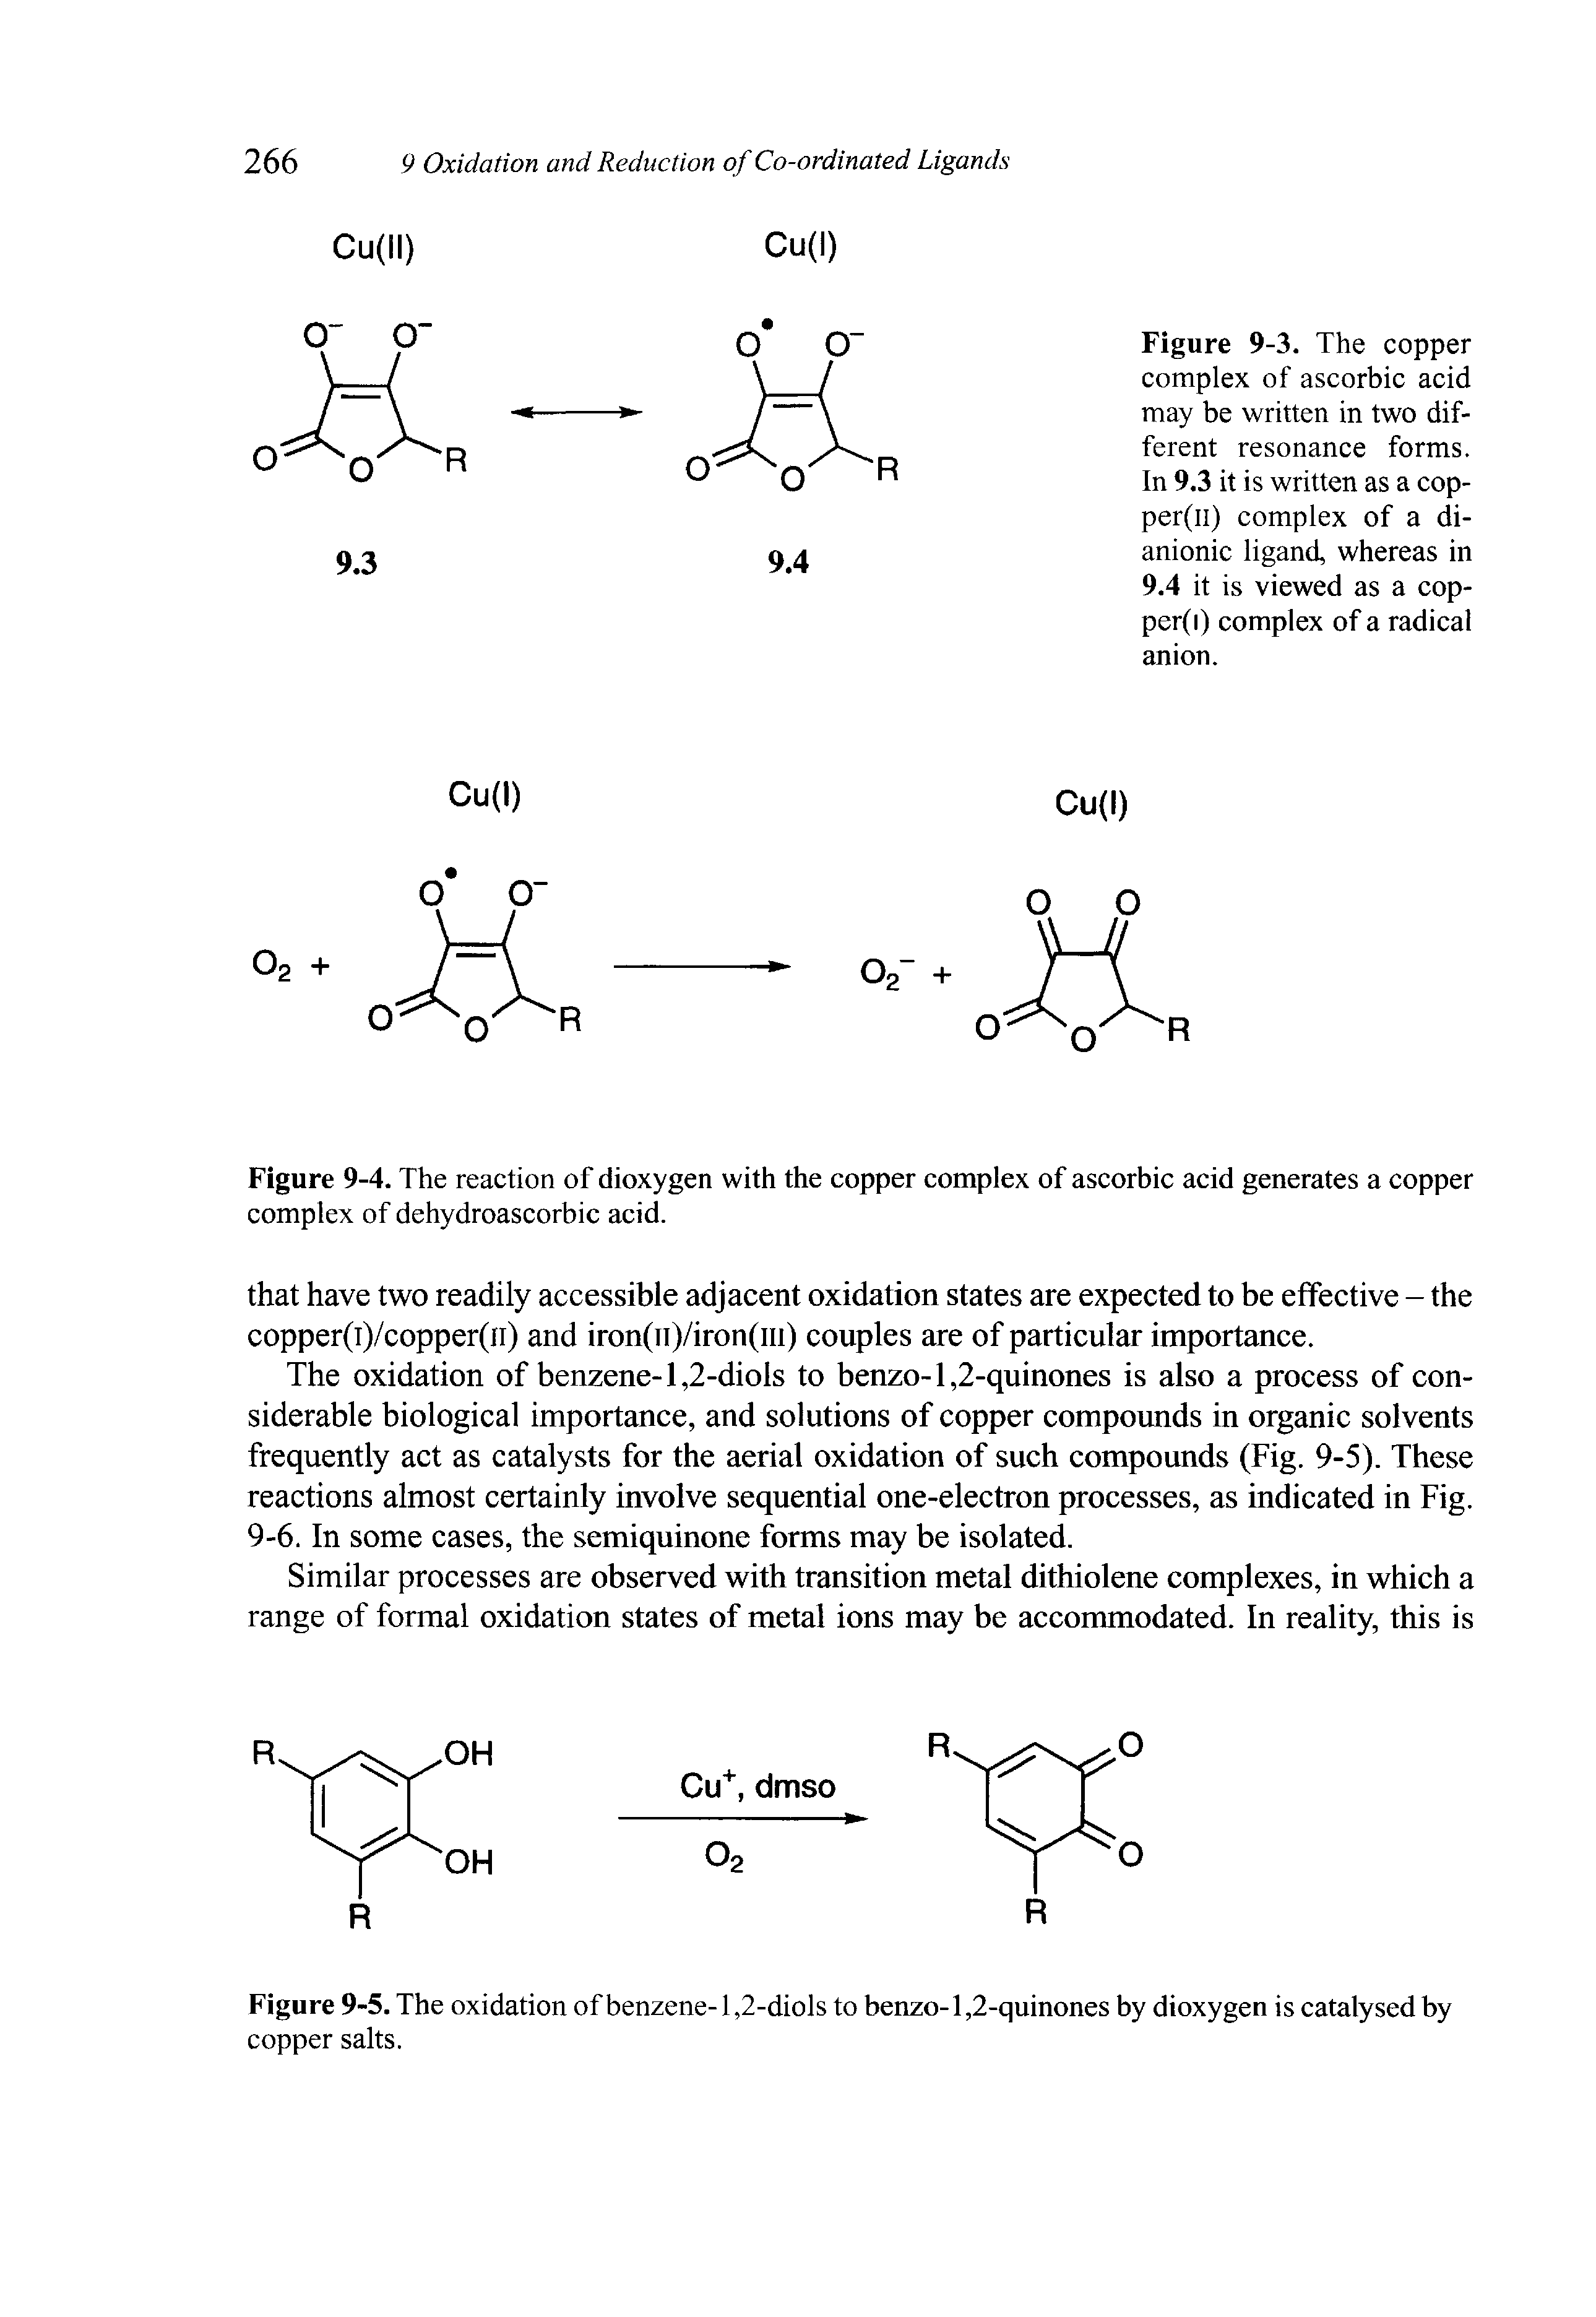 Figure 9-4. The reaction of dioxygen with the copper complex of ascorbic acid generates a copper complex of dehydroascorbic acid.